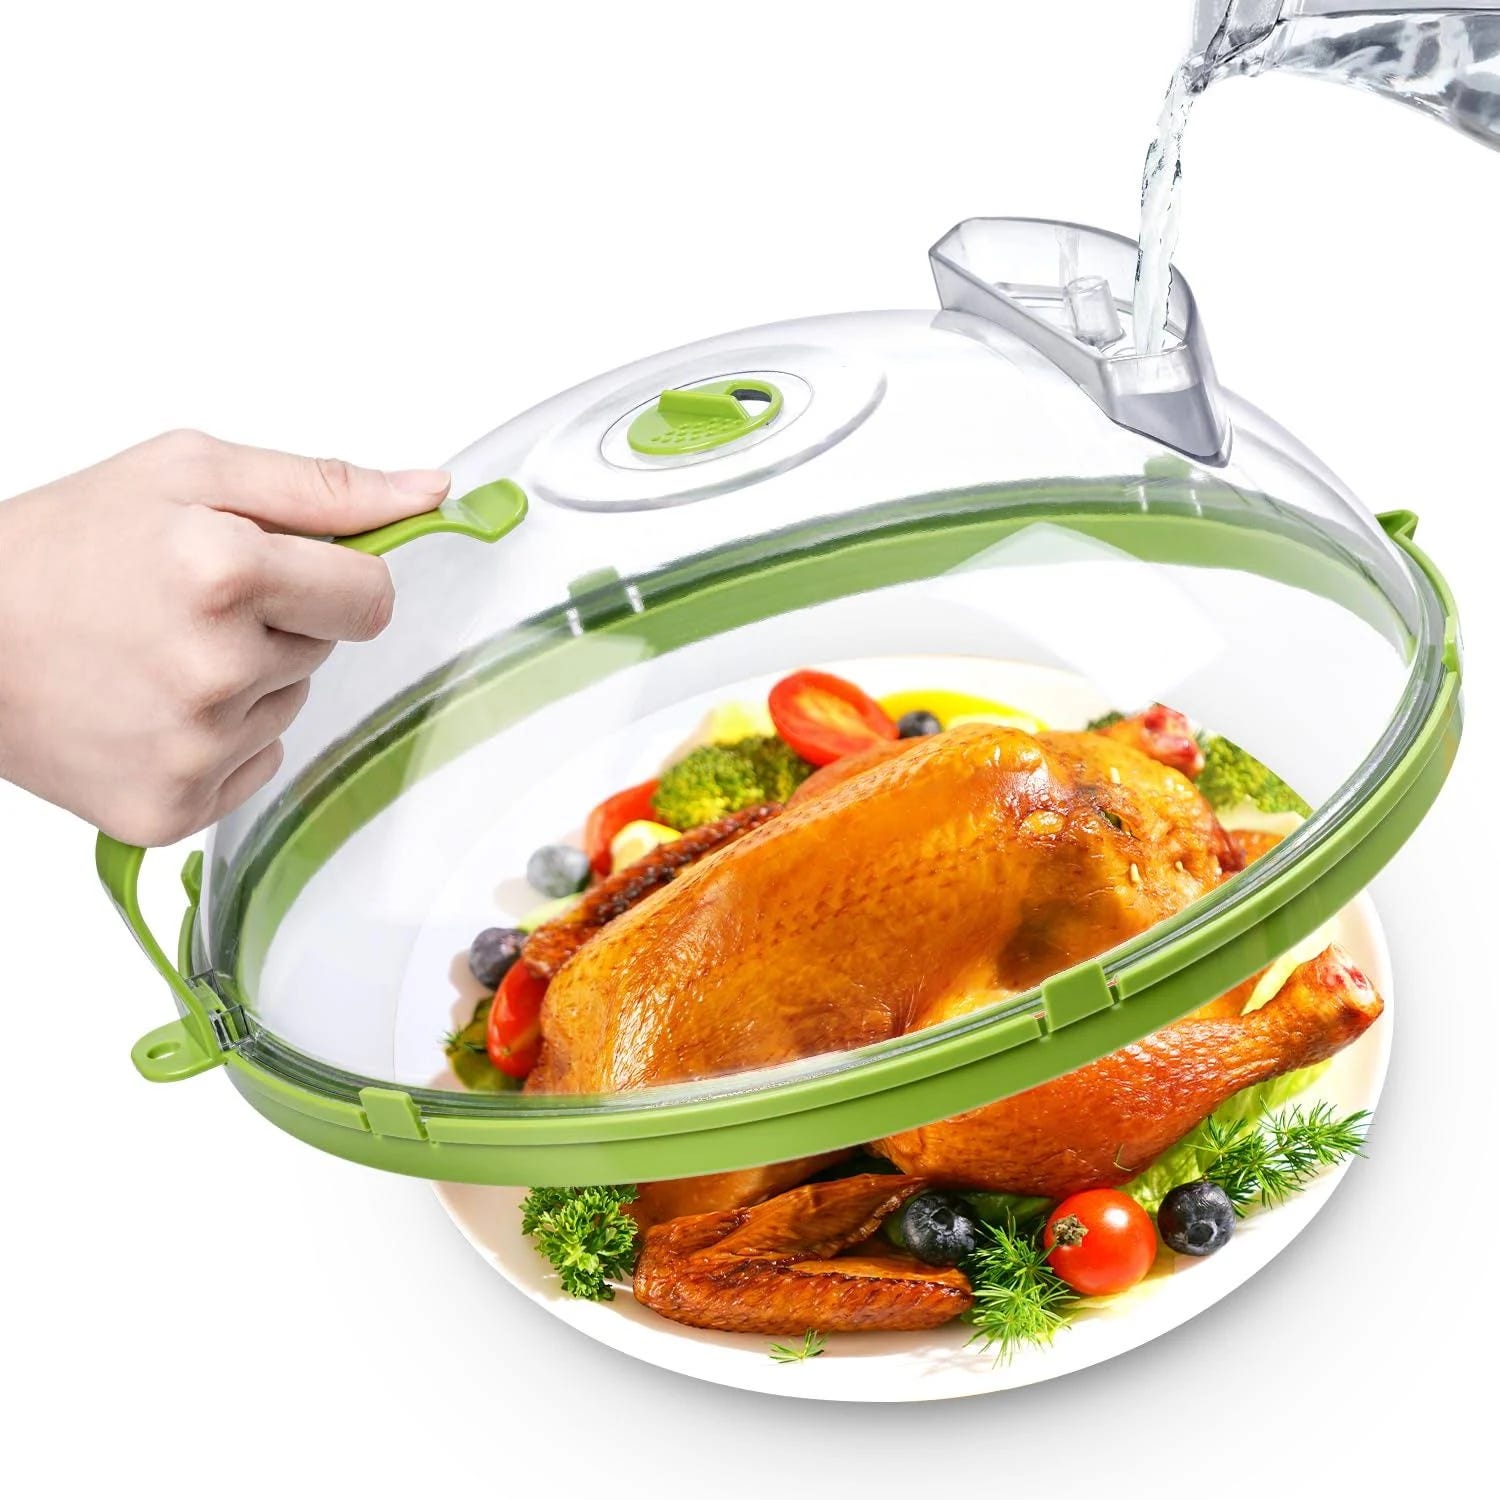 Gracenal Microwave Cover for Food with Handle - Splatter Guard | Image